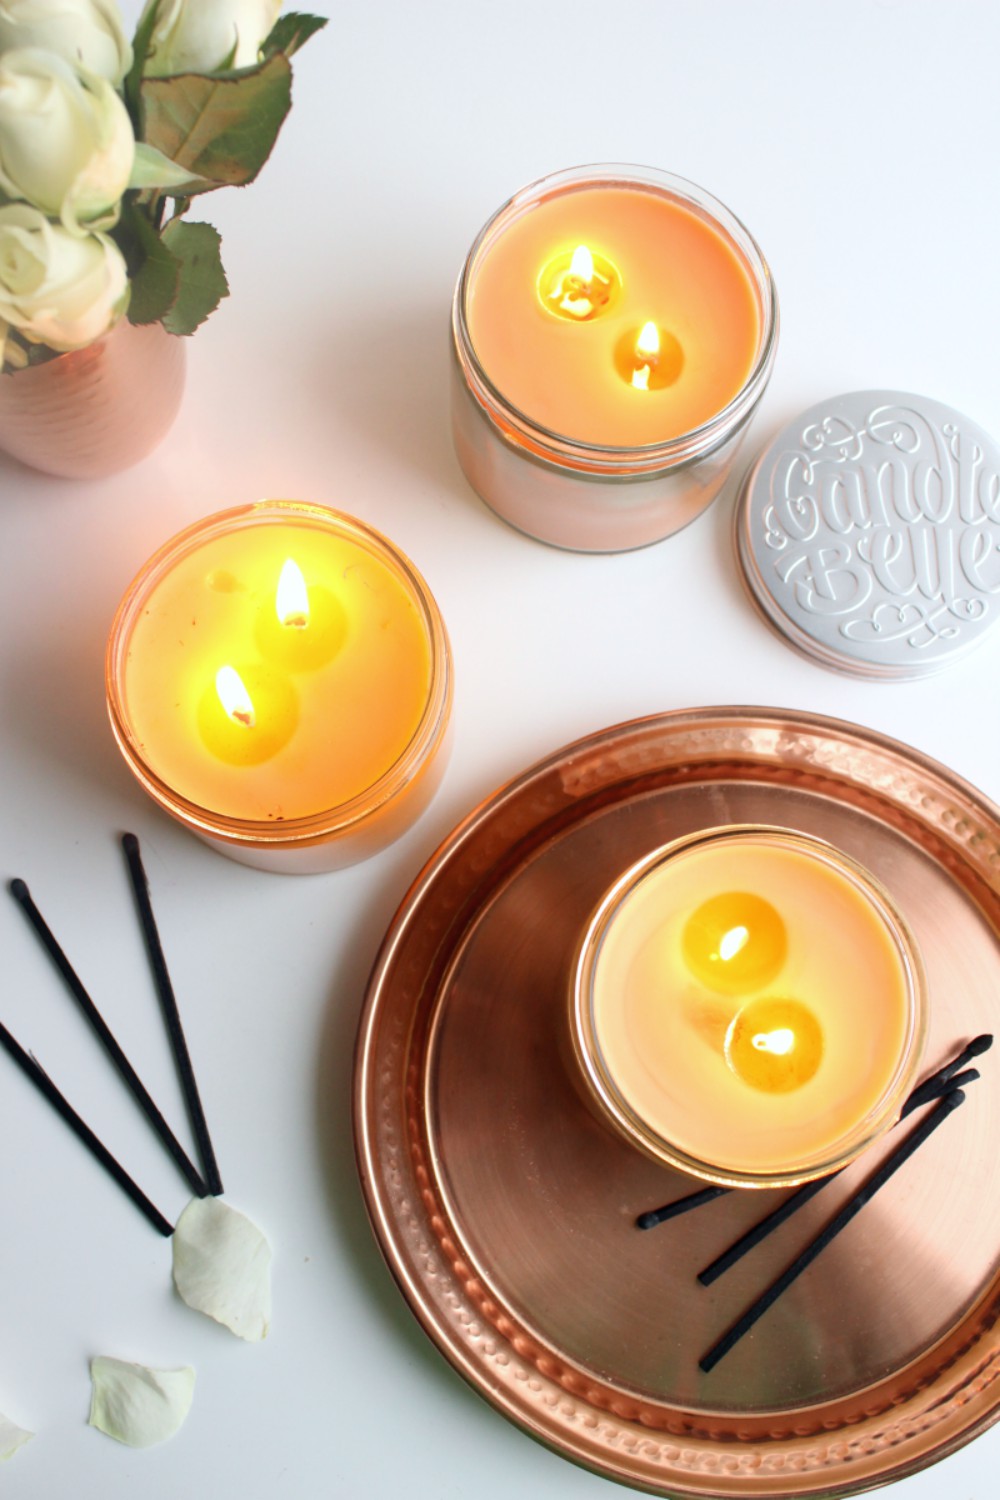 The Best Home Fragrance Brand You've Never Tried